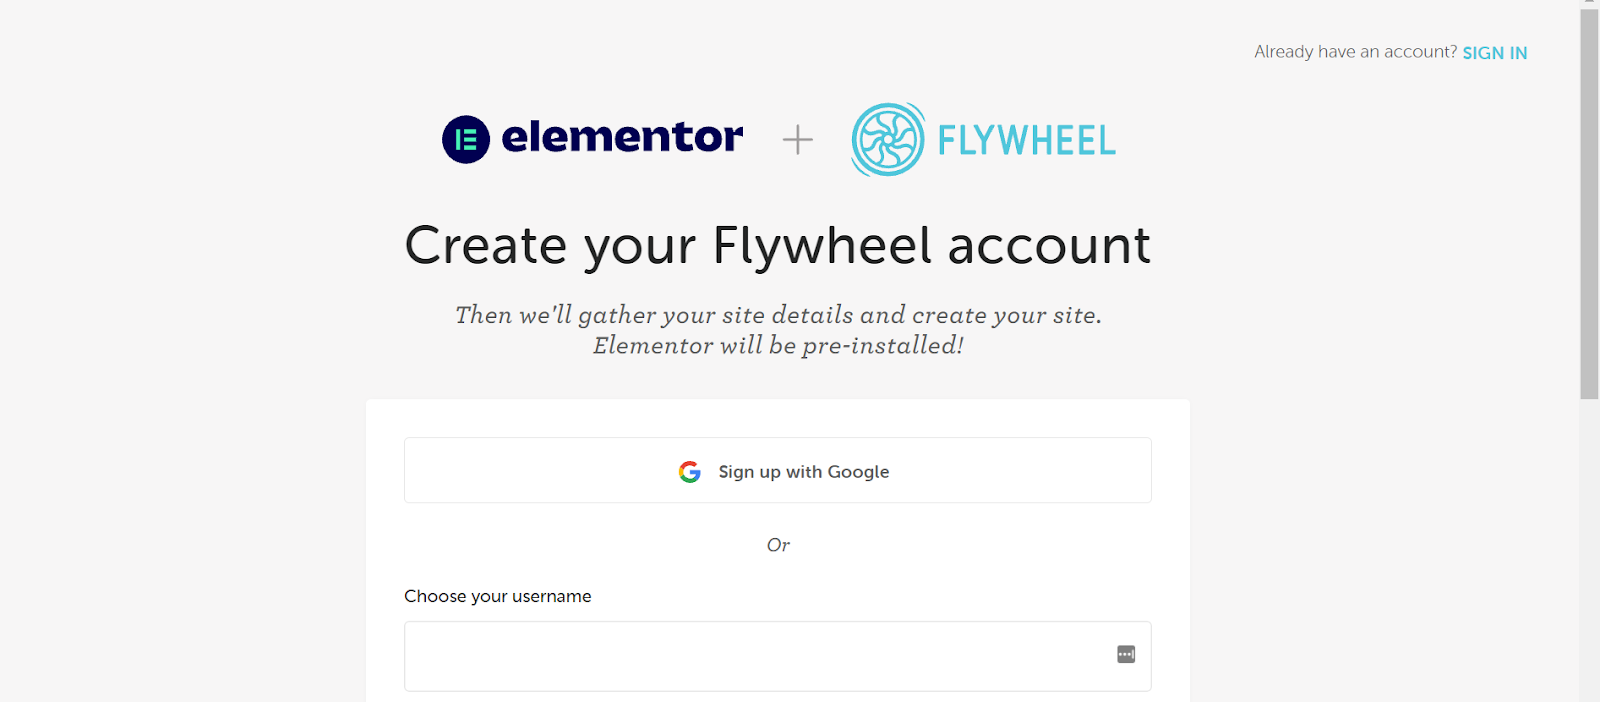 Elementor and Flywheel account connection